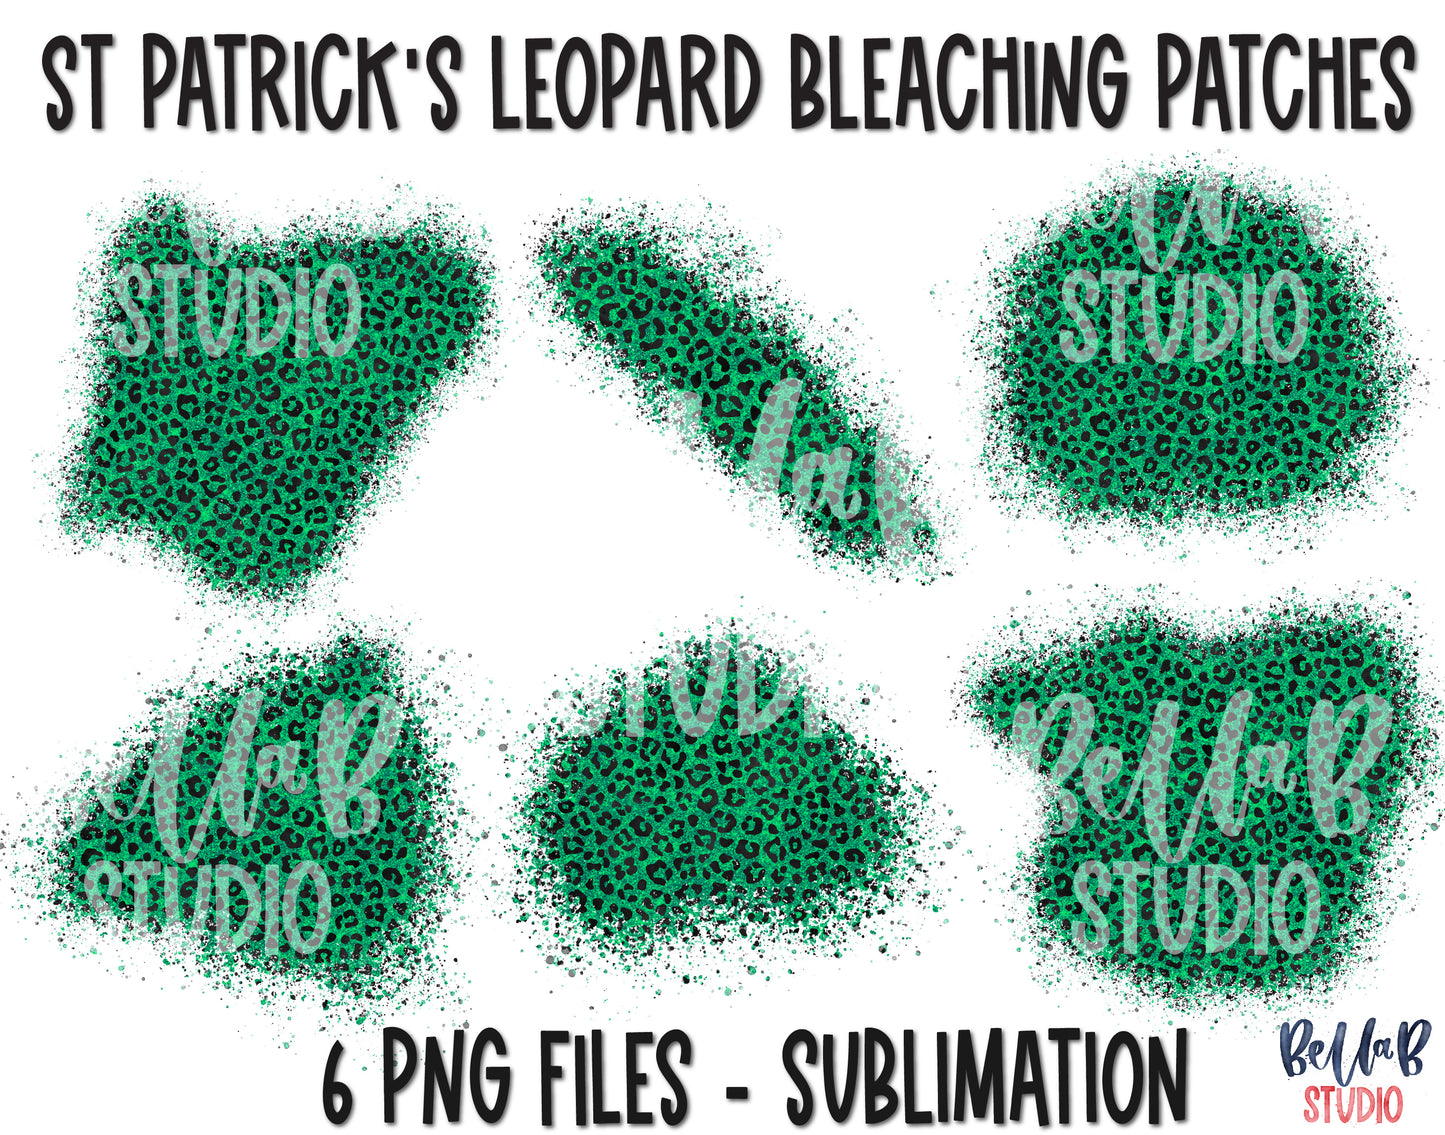 Green Leopard Sublimation Patches - T Shirt Bleaching Patches